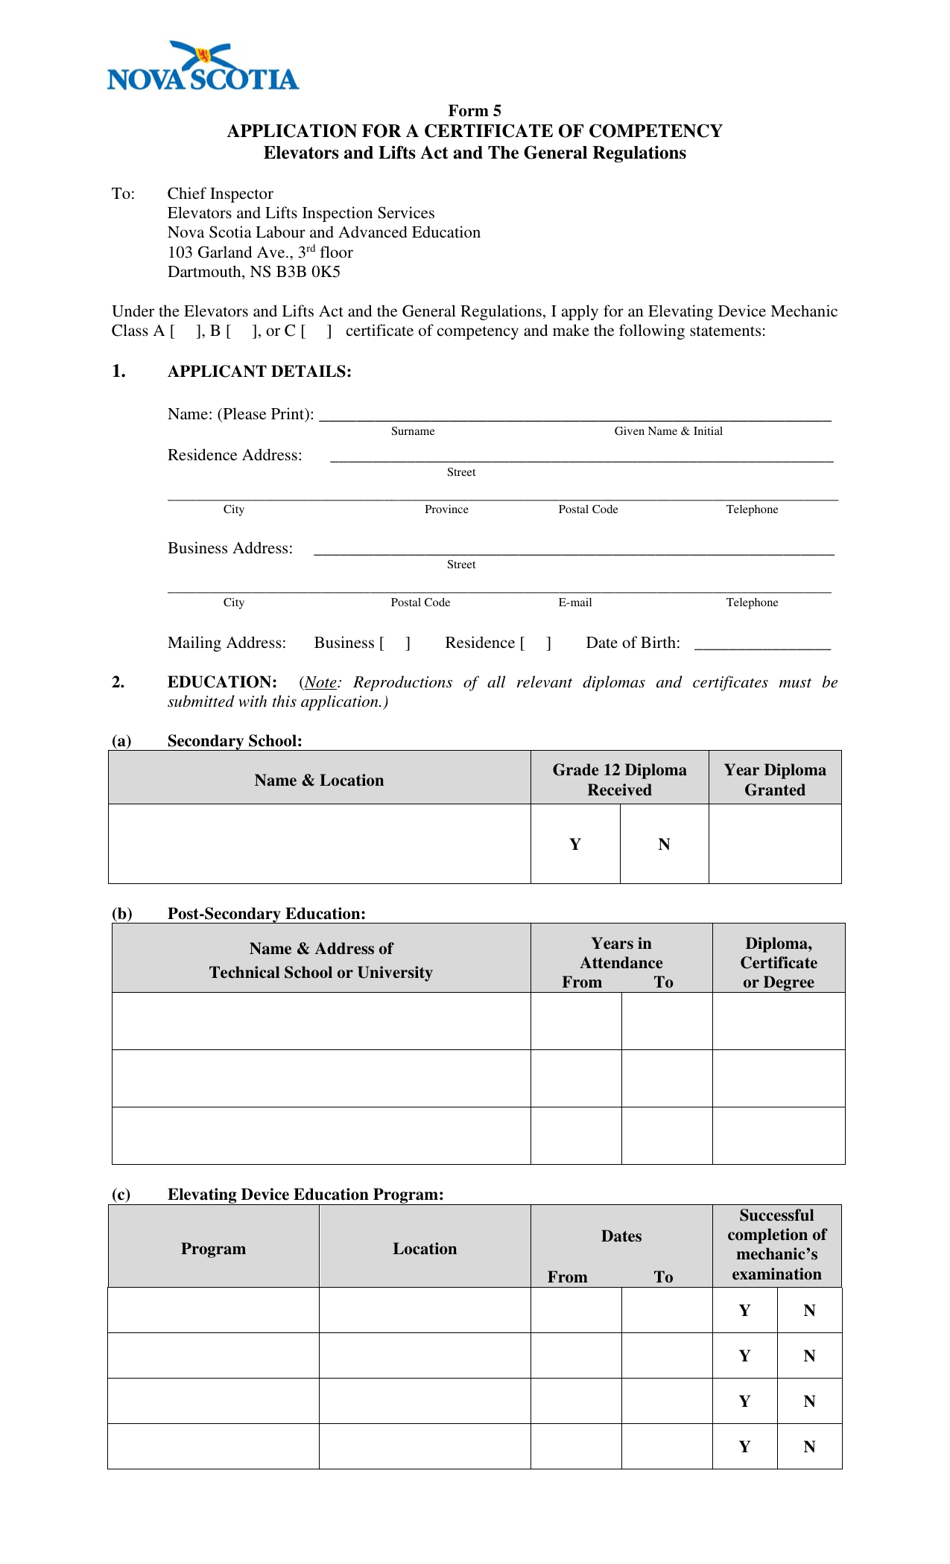 Form 5 Application for a Certificate of Competency - Nova Scotia, Canada, Page 1